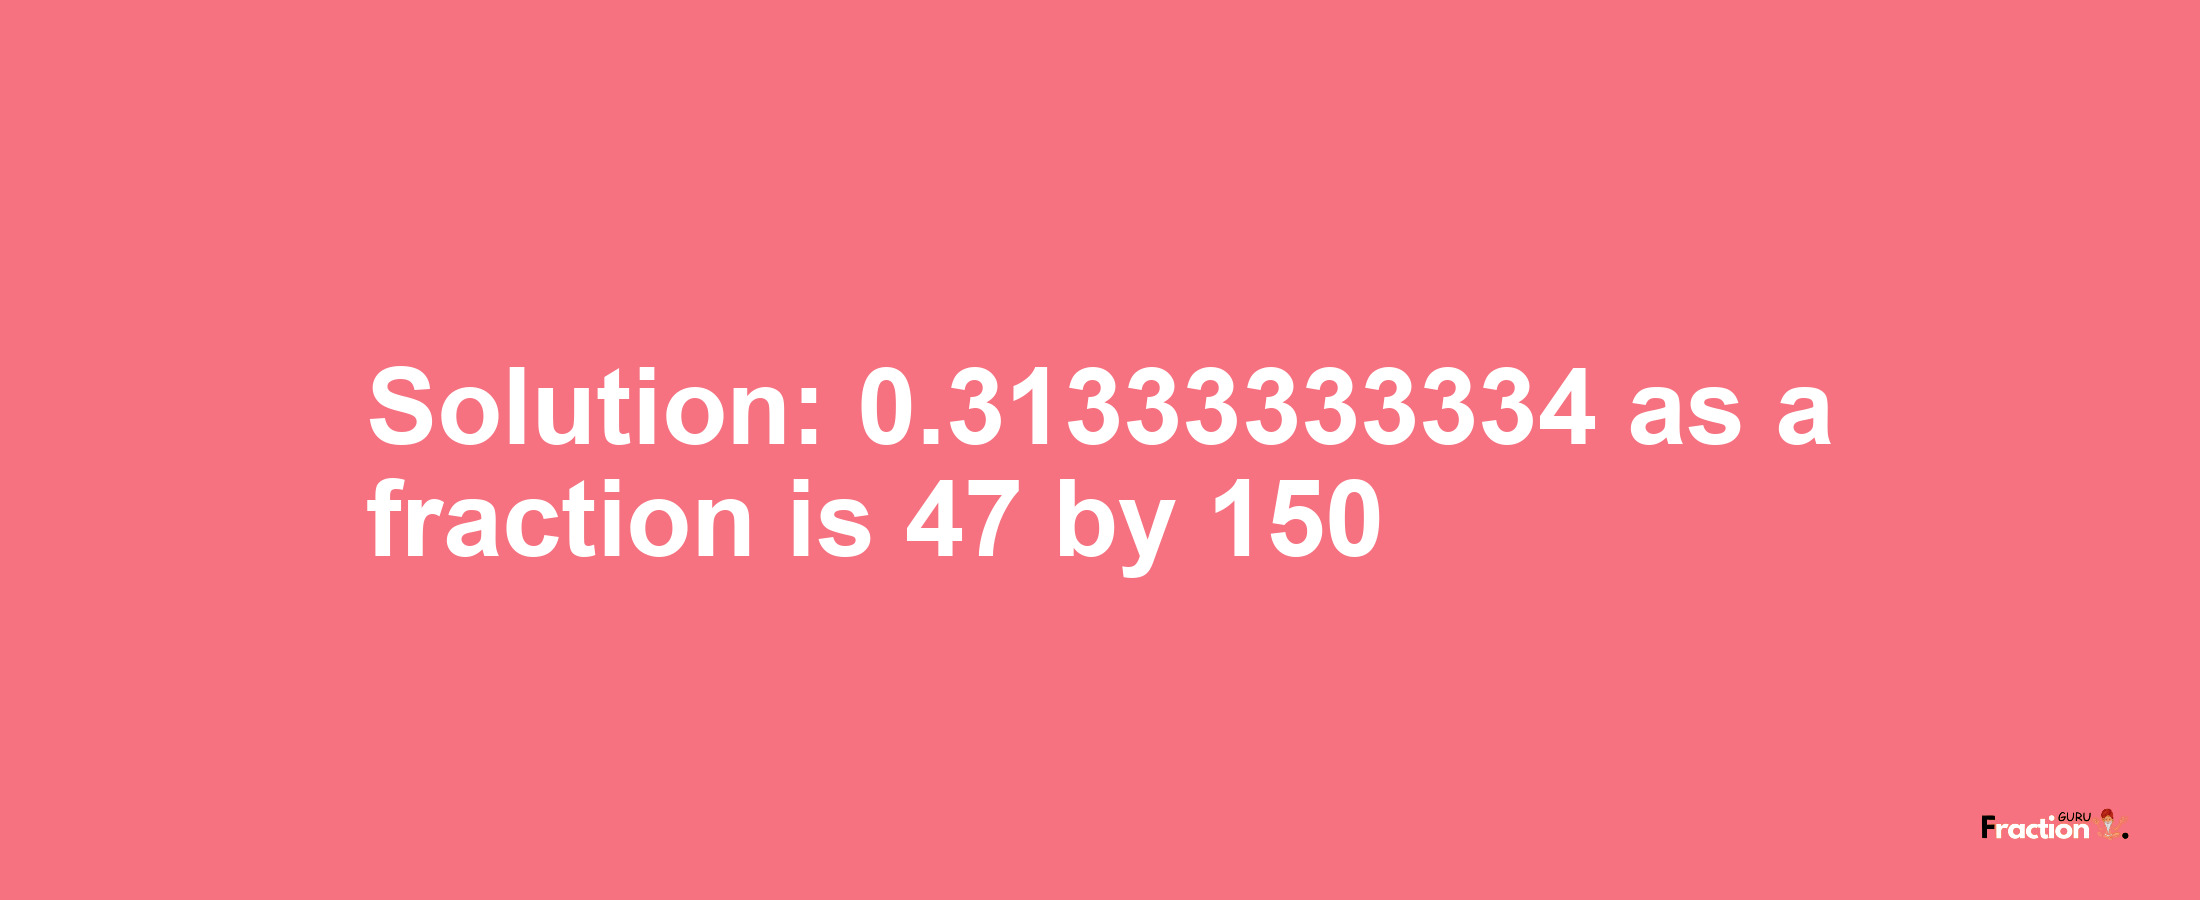 Solution:0.31333333334 as a fraction is 47/150